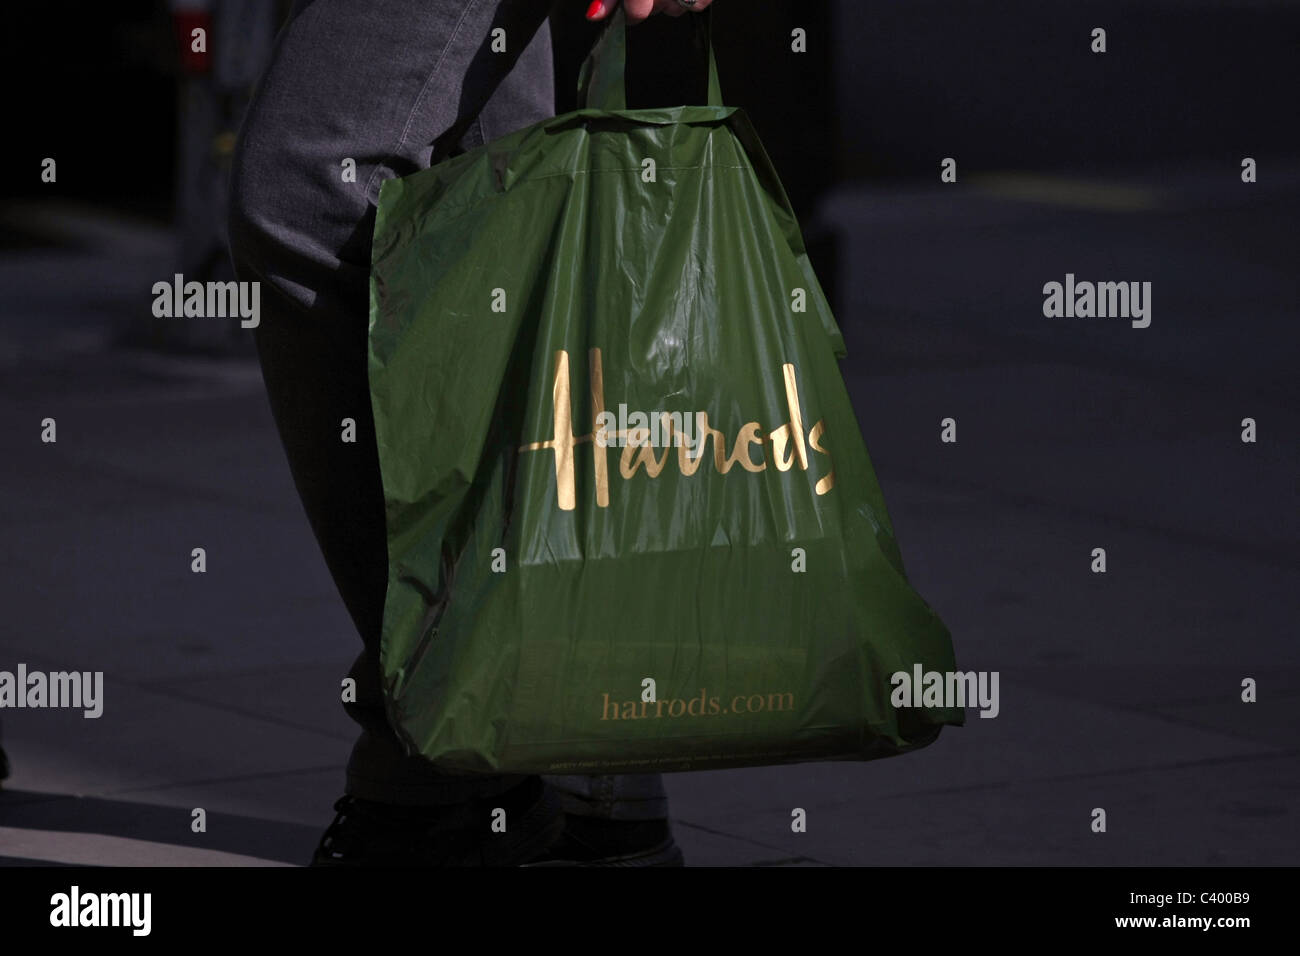 A plastic Harrods shopping bag being carried by a shopper Stock Photo ...